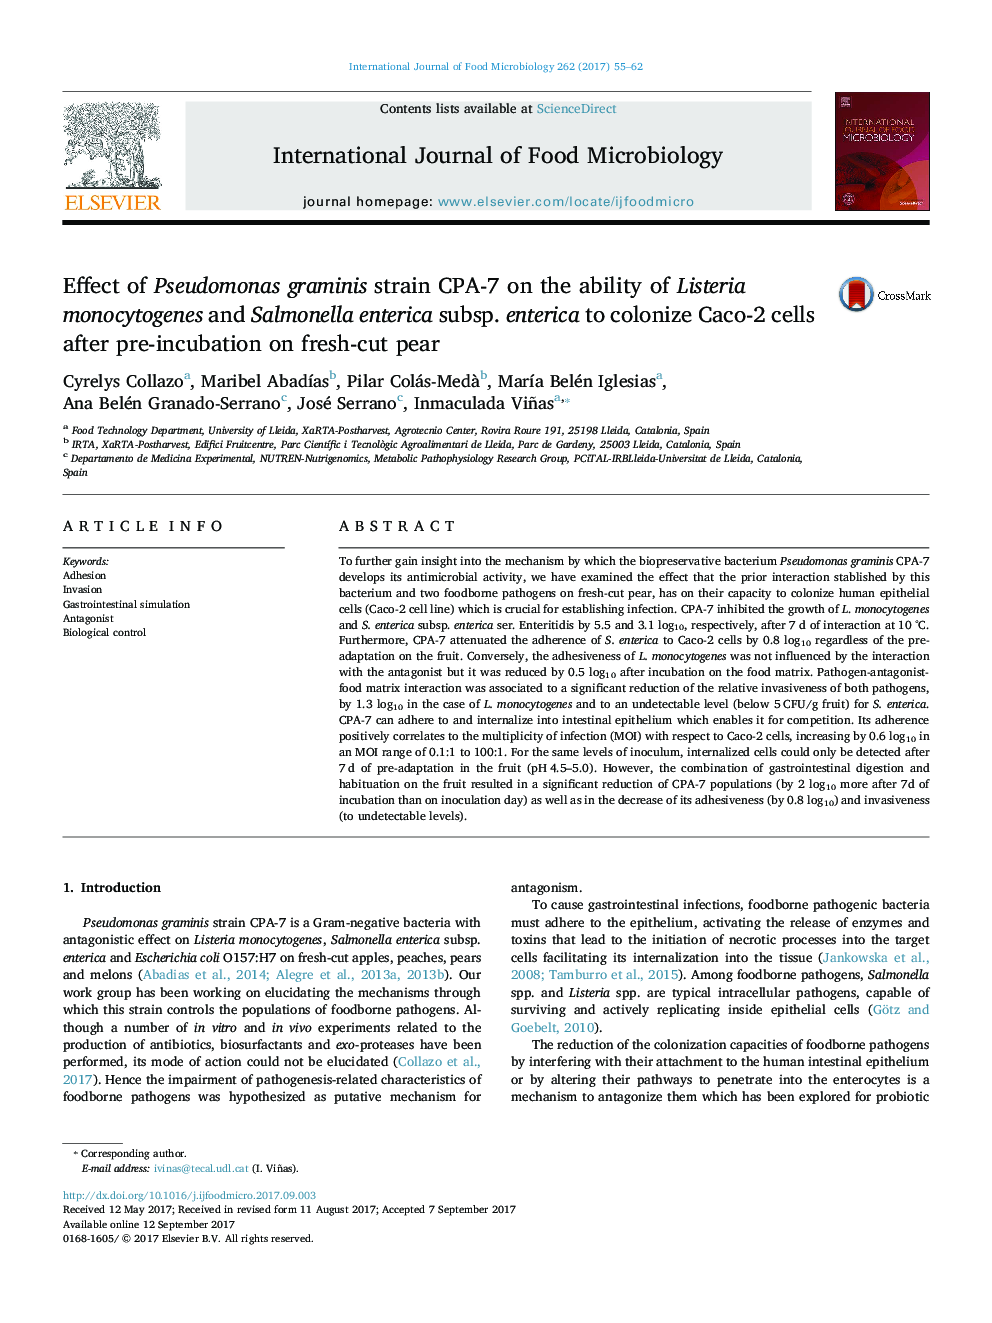 Effect of Pseudomonas graminis strain CPA-7 on the ability of Listeria monocytogenes and Salmonella enterica subsp. enterica to colonize Caco-2 cells after pre-incubation on fresh-cut pear